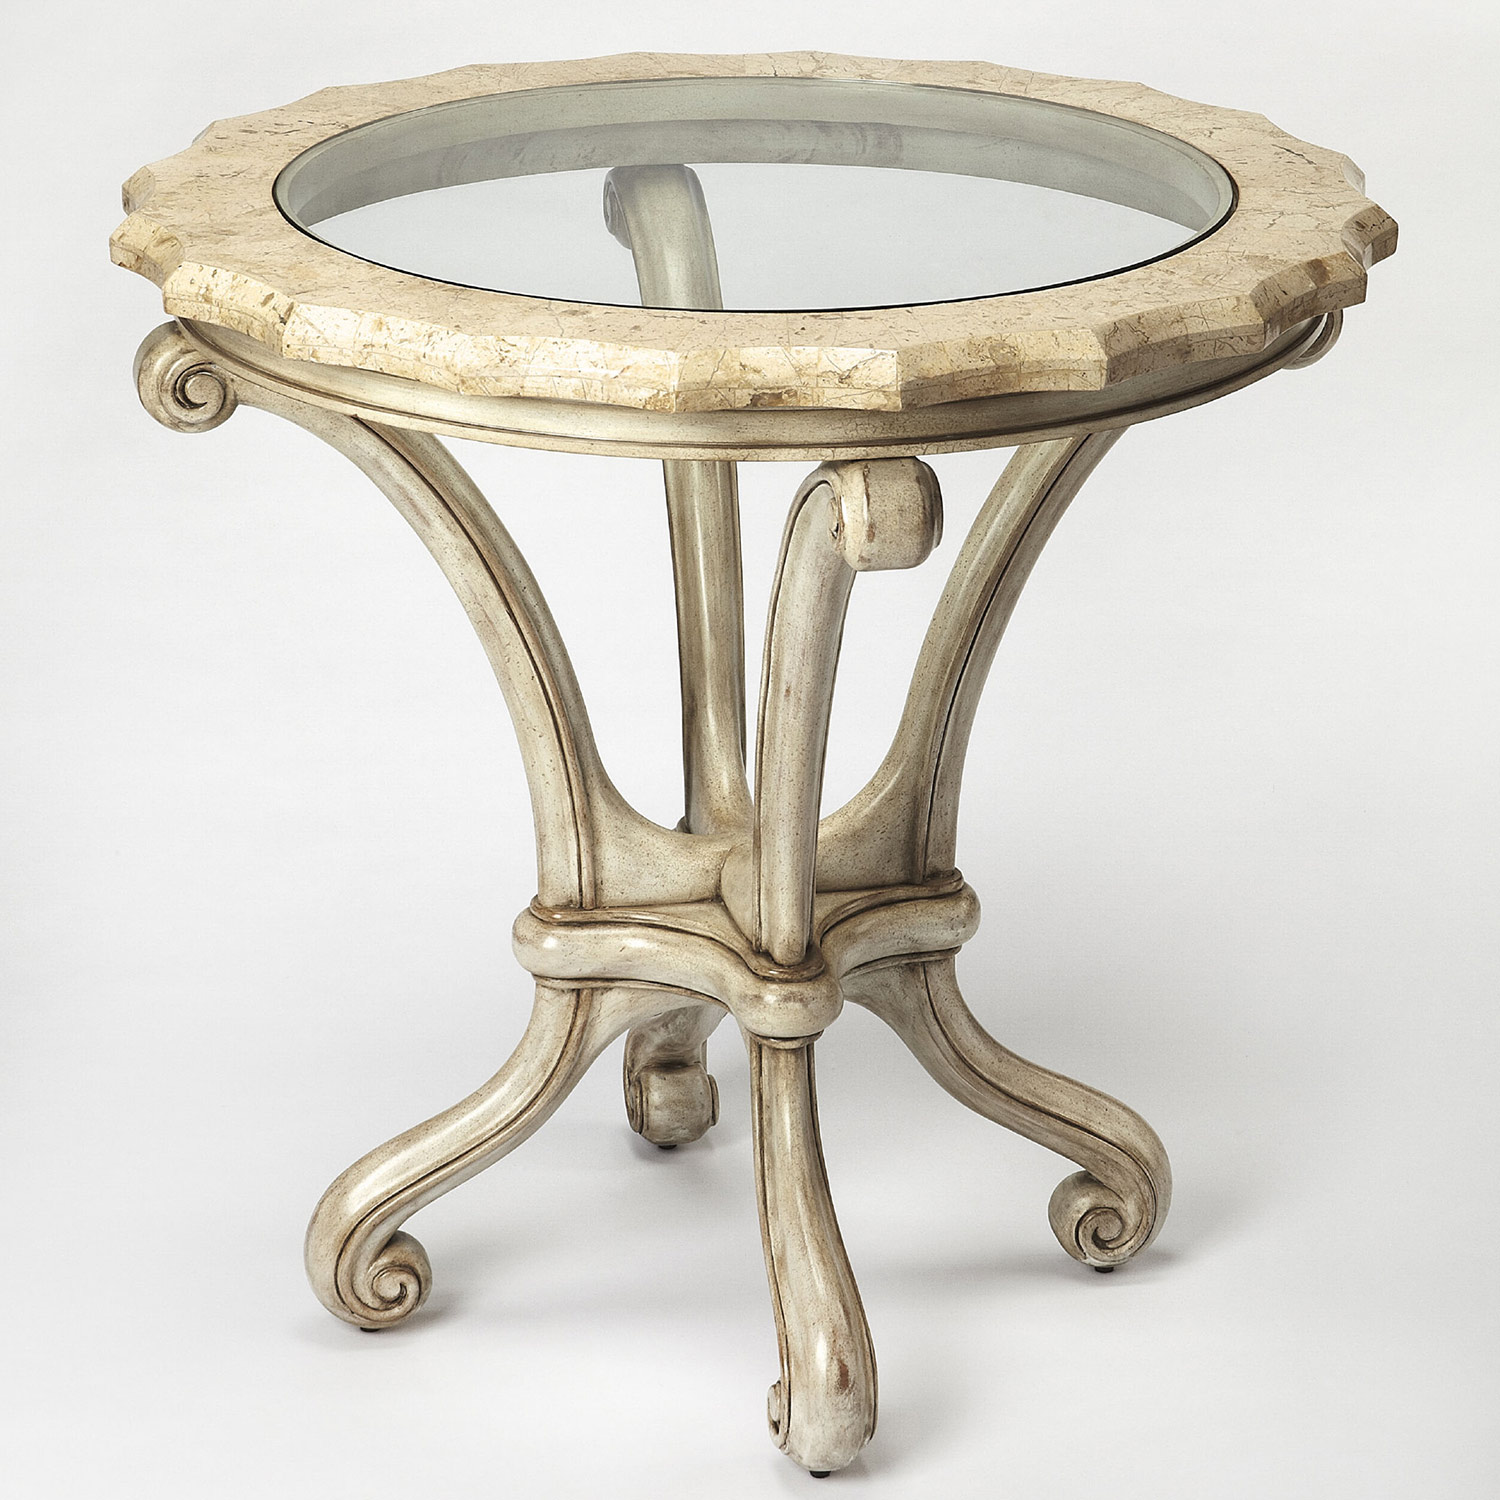 Butler 4388090 Clarendon Foyer Accent Table In Cream Fossil Stone